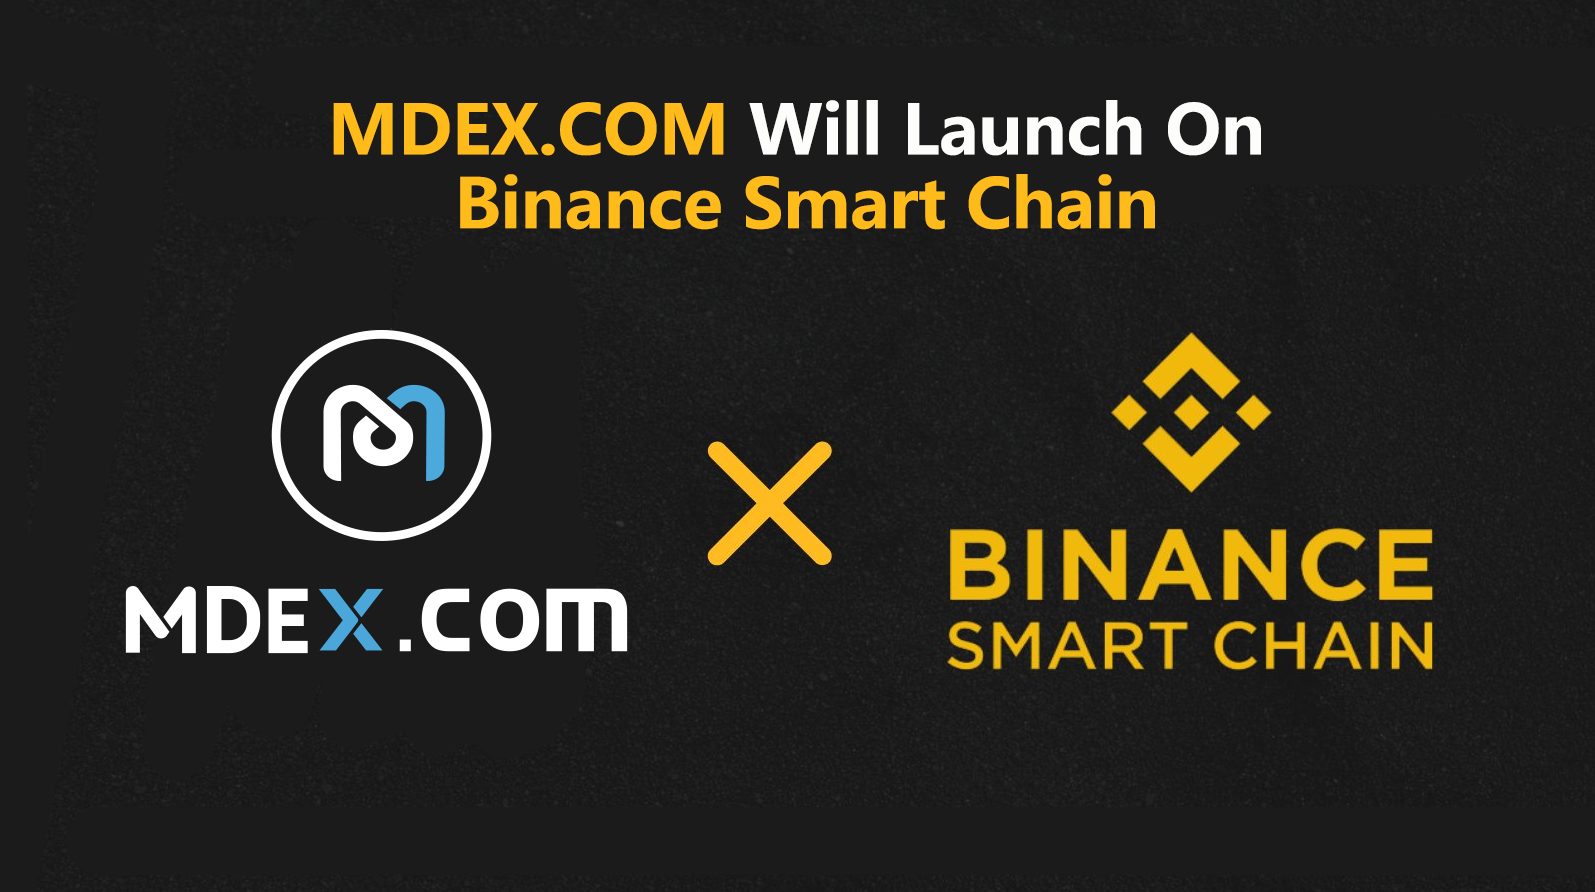 MDEX.COM Will Launch On BSC Mainnet